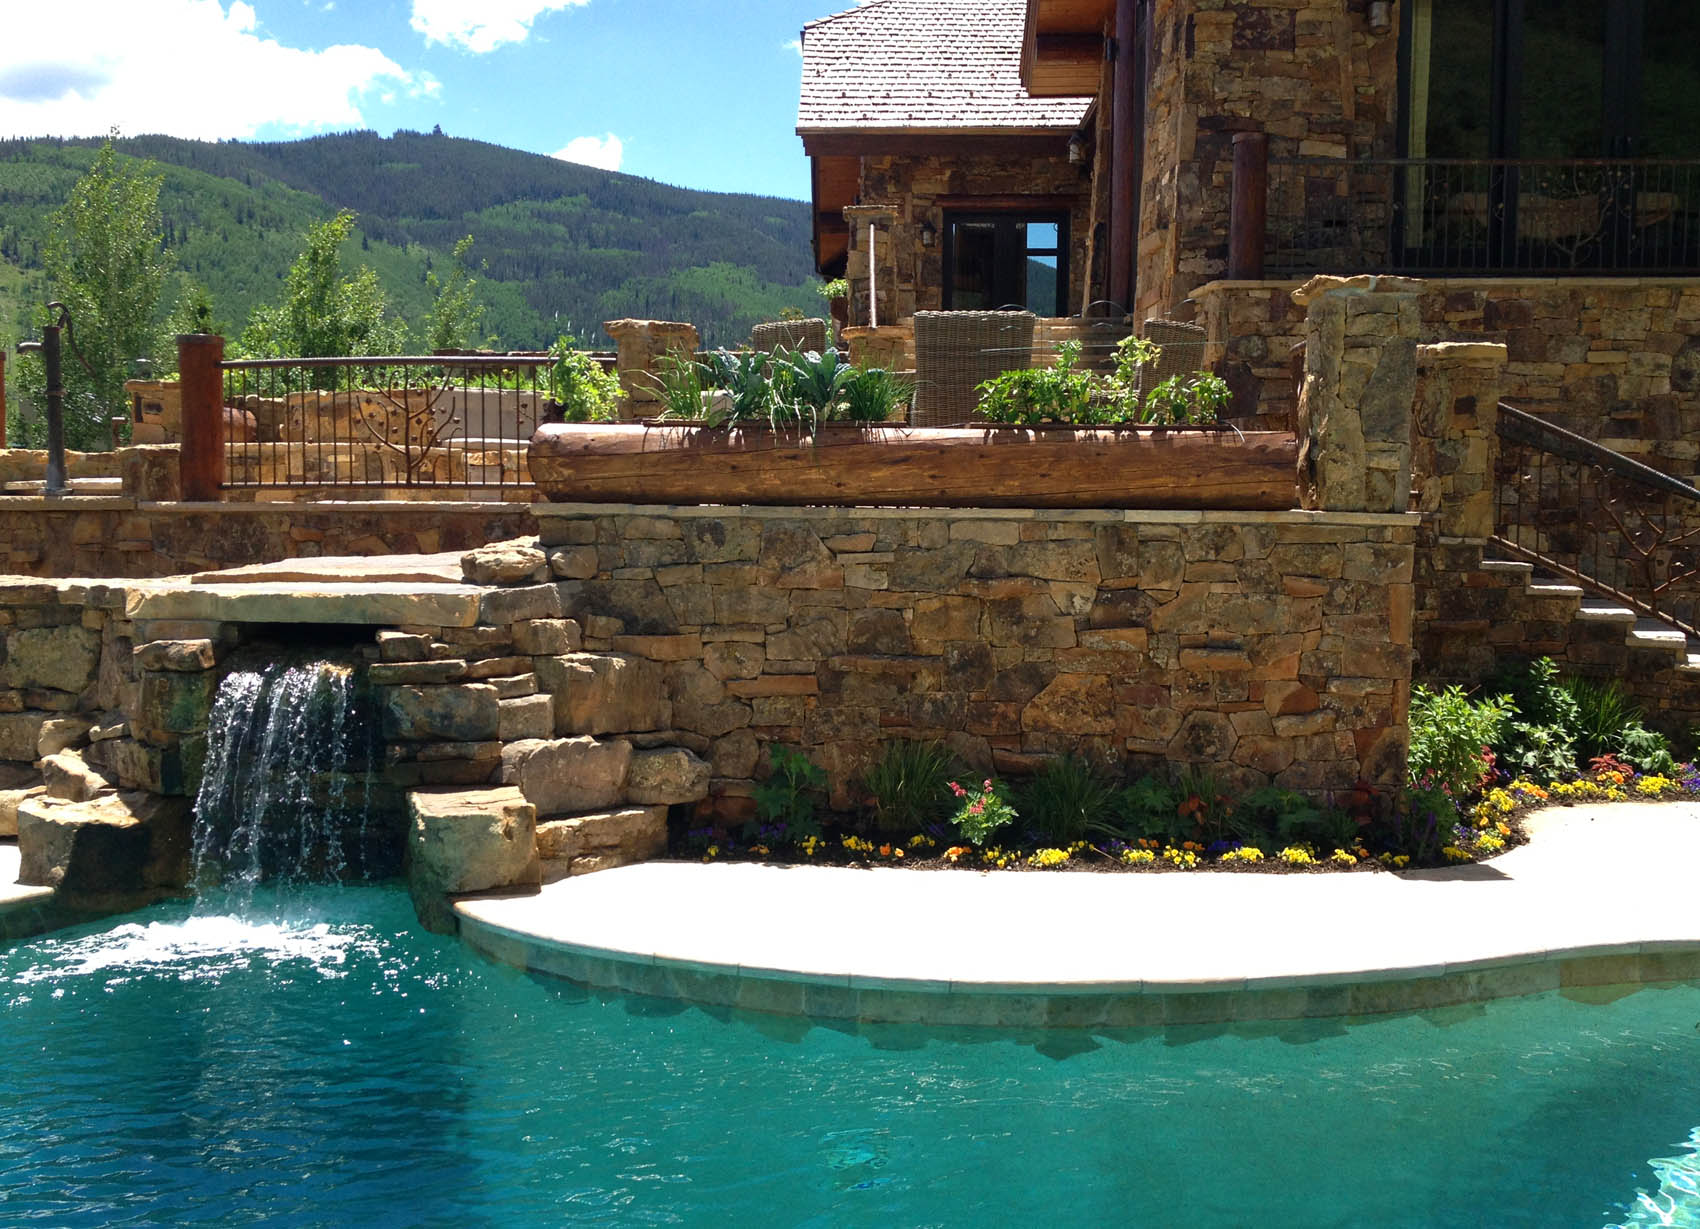 A luxurious outdoor pool with a stone waterfall feature beside a house with mountain views, surrounded by lush greenery and colorful flower beds.